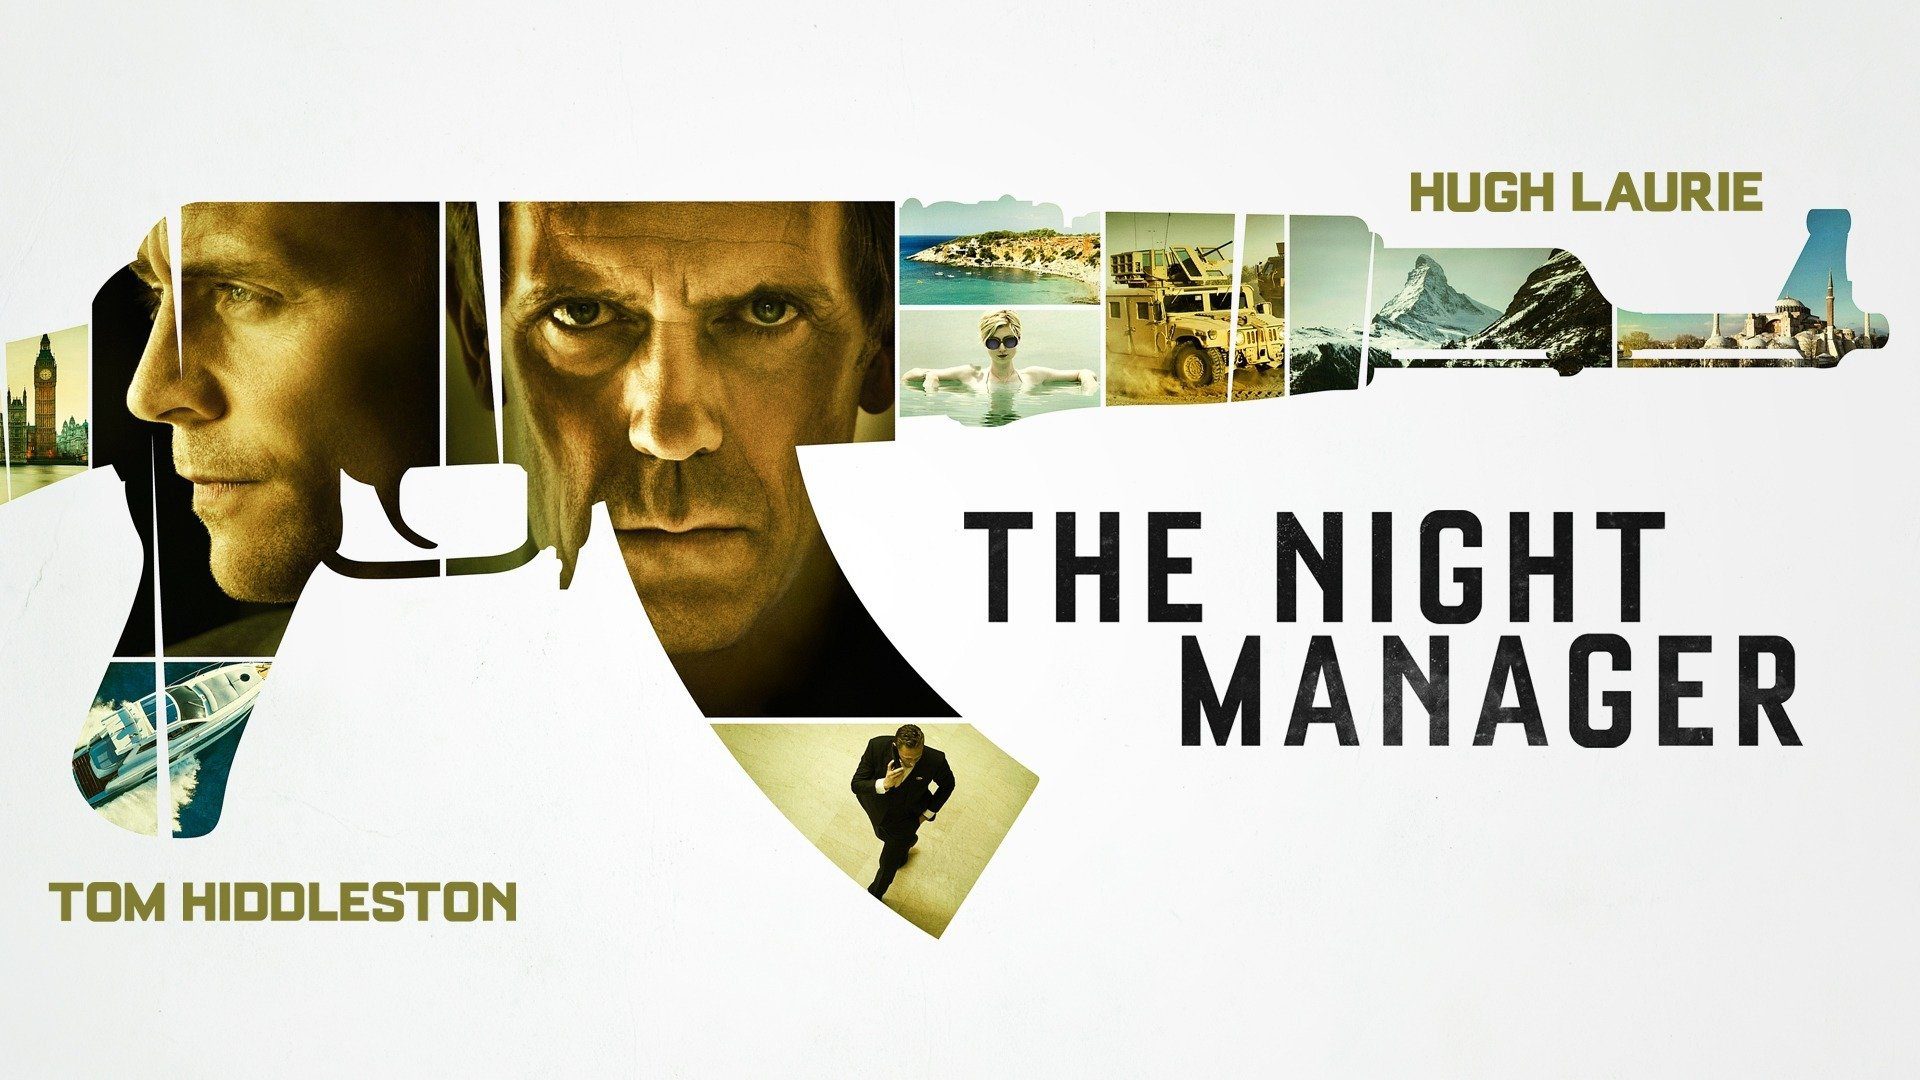 Another series like WeCrashed, The Night Manager